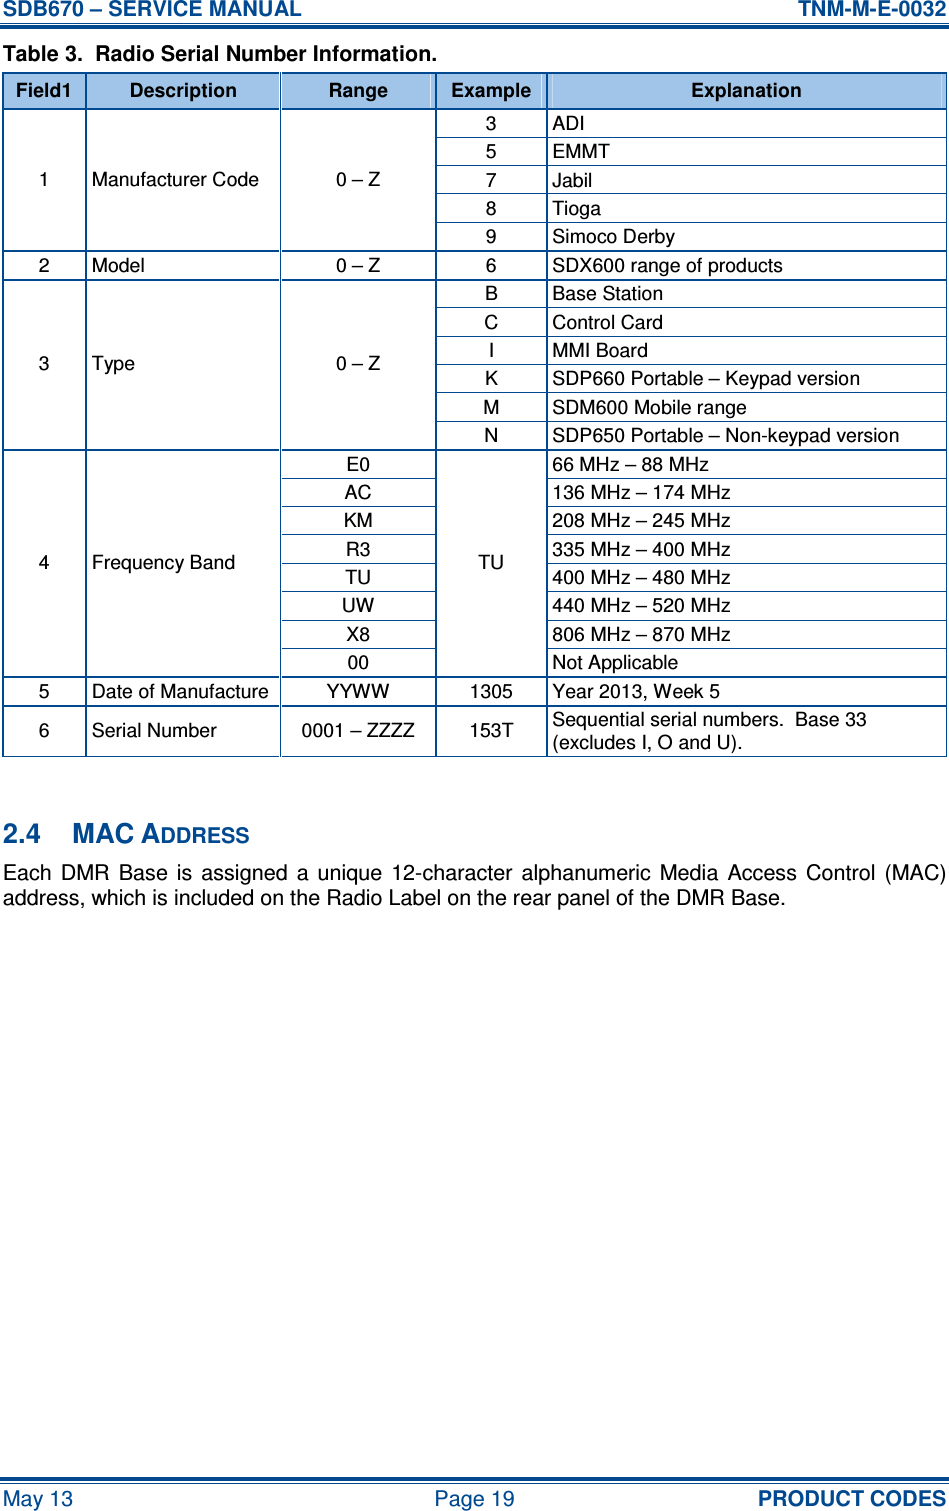 SDB670 – SERVICE MANUAL  TNM-M-E-0032 May 13  Page 19  PRODUCT CODES Table 3.  Radio Serial Number Information. Field1  Description  Range  Example  Explanation 3  ADI 5  EMMT 7  Jabil 8  Tioga 1  Manufacturer Code  0 – Z 9  Simoco Derby 2  Model  0 – Z  6  SDX600 range of products B  Base Station C  Control Card I  MMI Board K  SDP660 Portable – Keypad version M  SDM600 Mobile range 3  Type  0 – Z N  SDP650 Portable – Non-keypad version E0  66 MHz – 88 MHz AC  136 MHz – 174 MHz KM  208 MHz – 245 MHz R3  335 MHz – 400 MHz TU  400 MHz – 480 MHz UW  440 MHz – 520 MHz X8  806 MHz – 870 MHz 4  Frequency Band 00 TU Not Applicable 5  Date of Manufacture YYWW  1305  Year 2013, Week 5 6  Serial Number  0001 – ZZZZ  153T  Sequential serial numbers.  Base 33 (excludes I, O and U).  2.4  MAC ADDRESS Each  DMR  Base  is  assigned  a  unique  12-character  alphanumeric  Media  Access  Control  (MAC) address, which is included on the Radio Label on the rear panel of the DMR Base.    